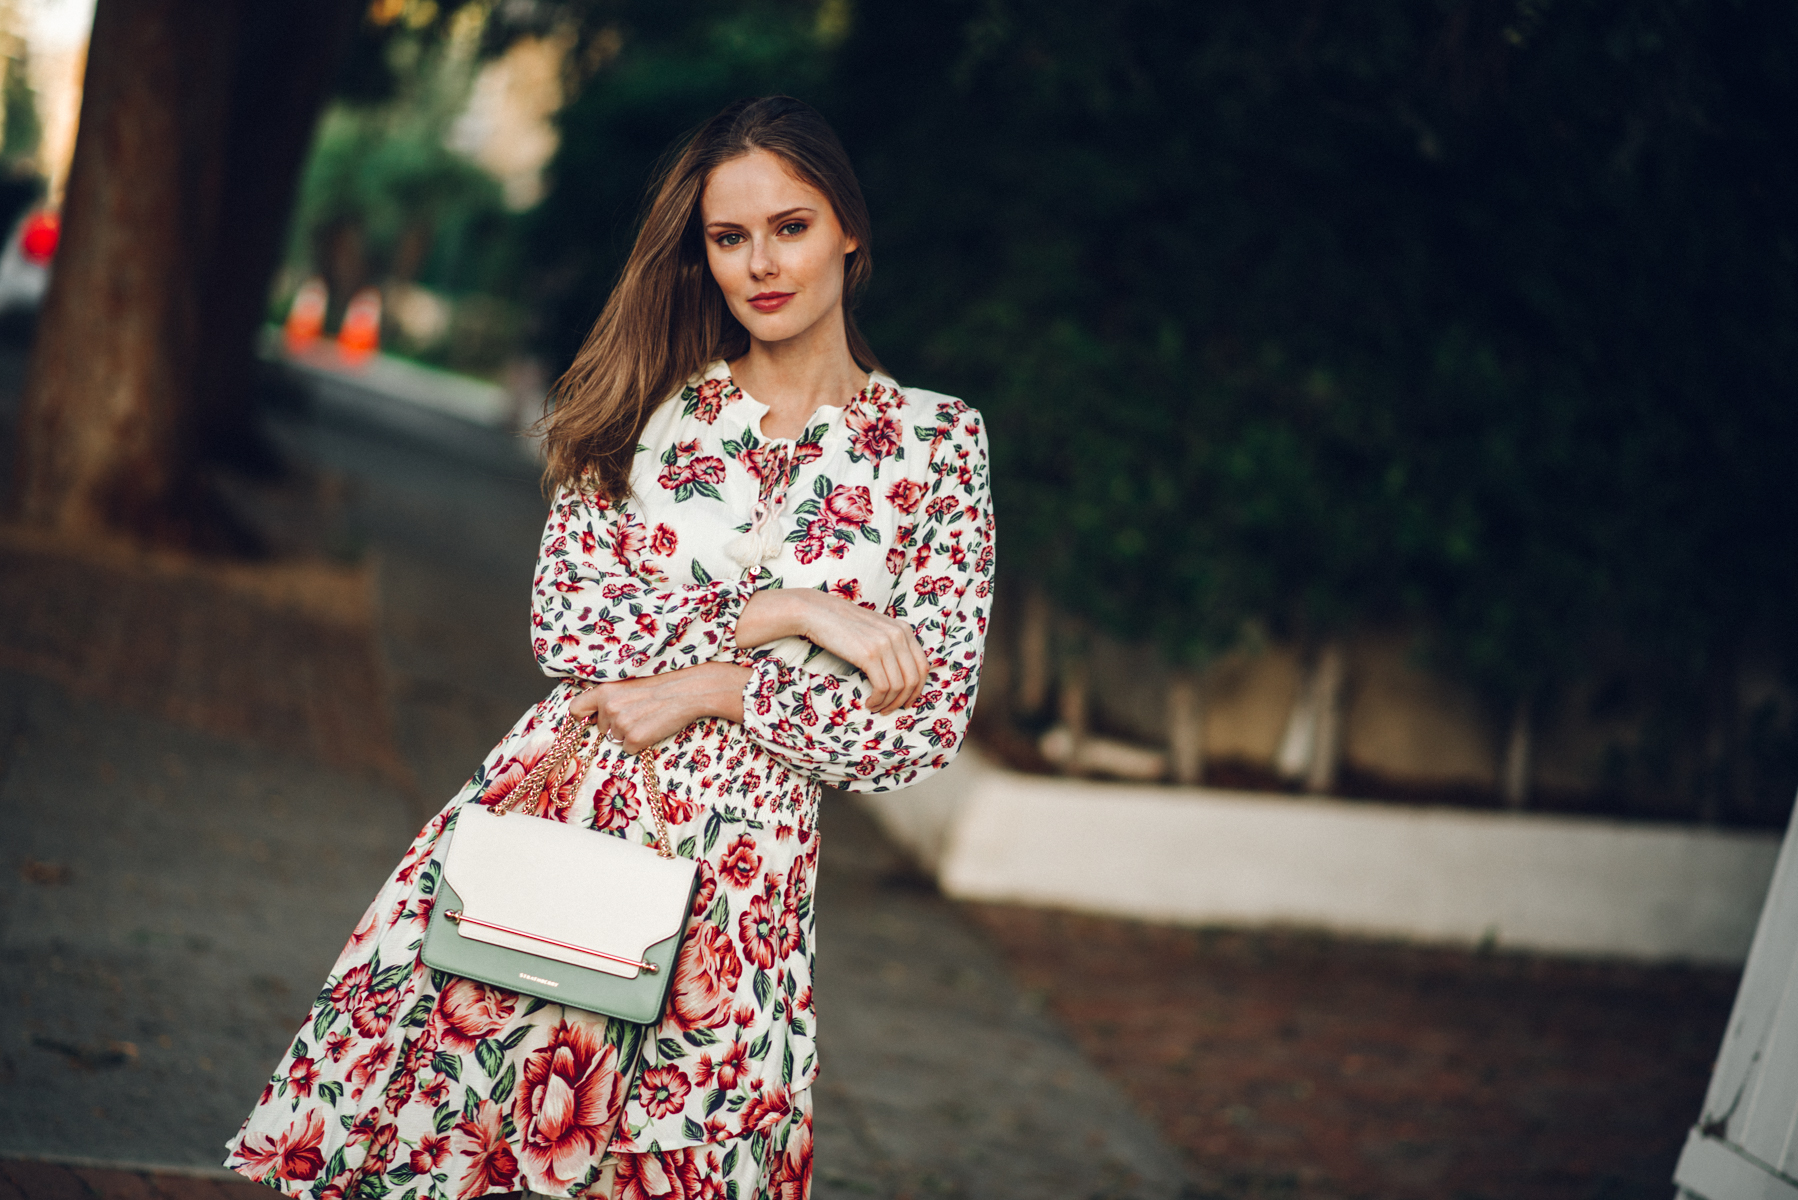 The Fall Floral Dress - The A List